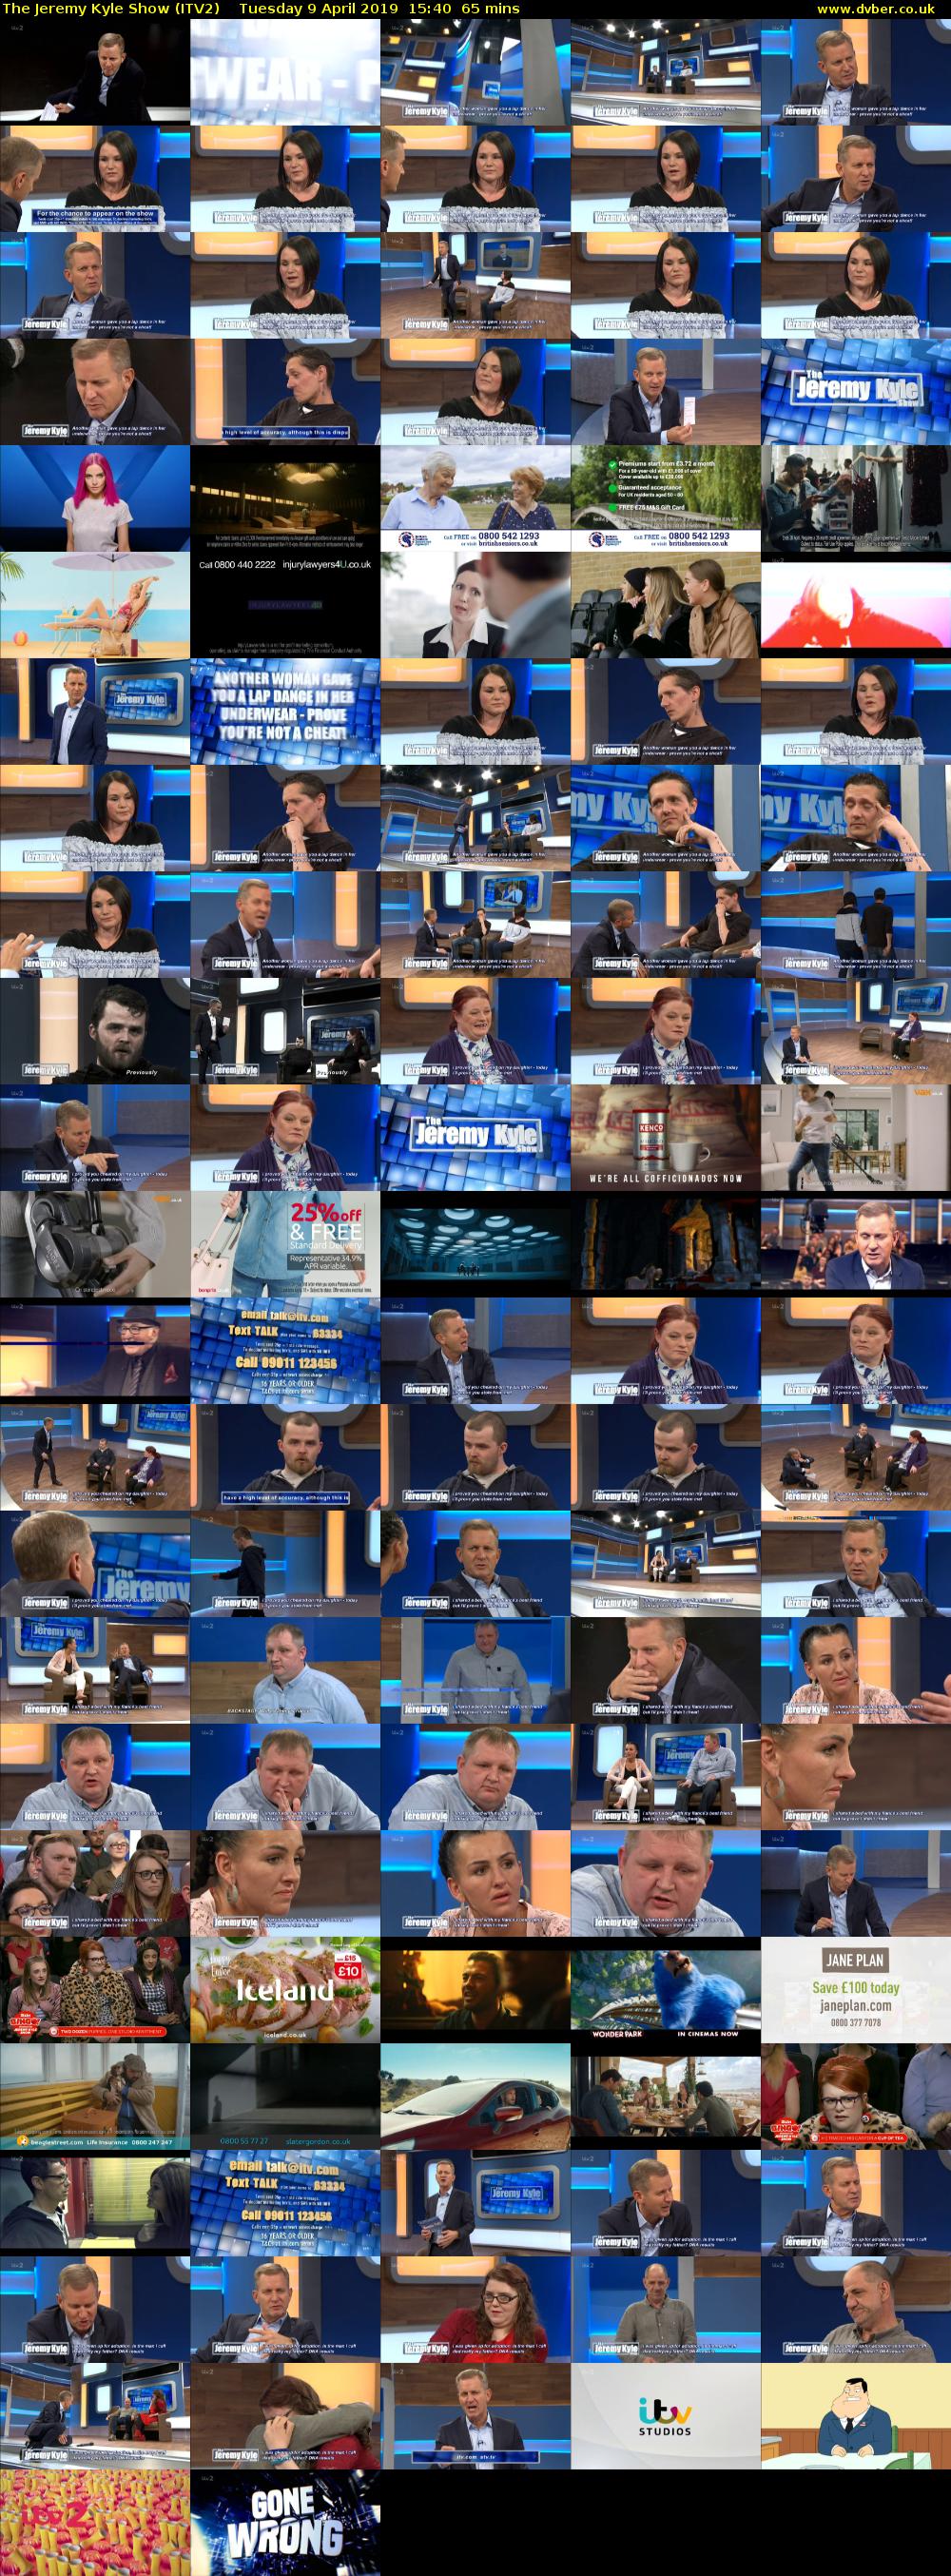 The Jeremy Kyle Show (ITV2) Tuesday 9 April 2019 15:40 - 16:45